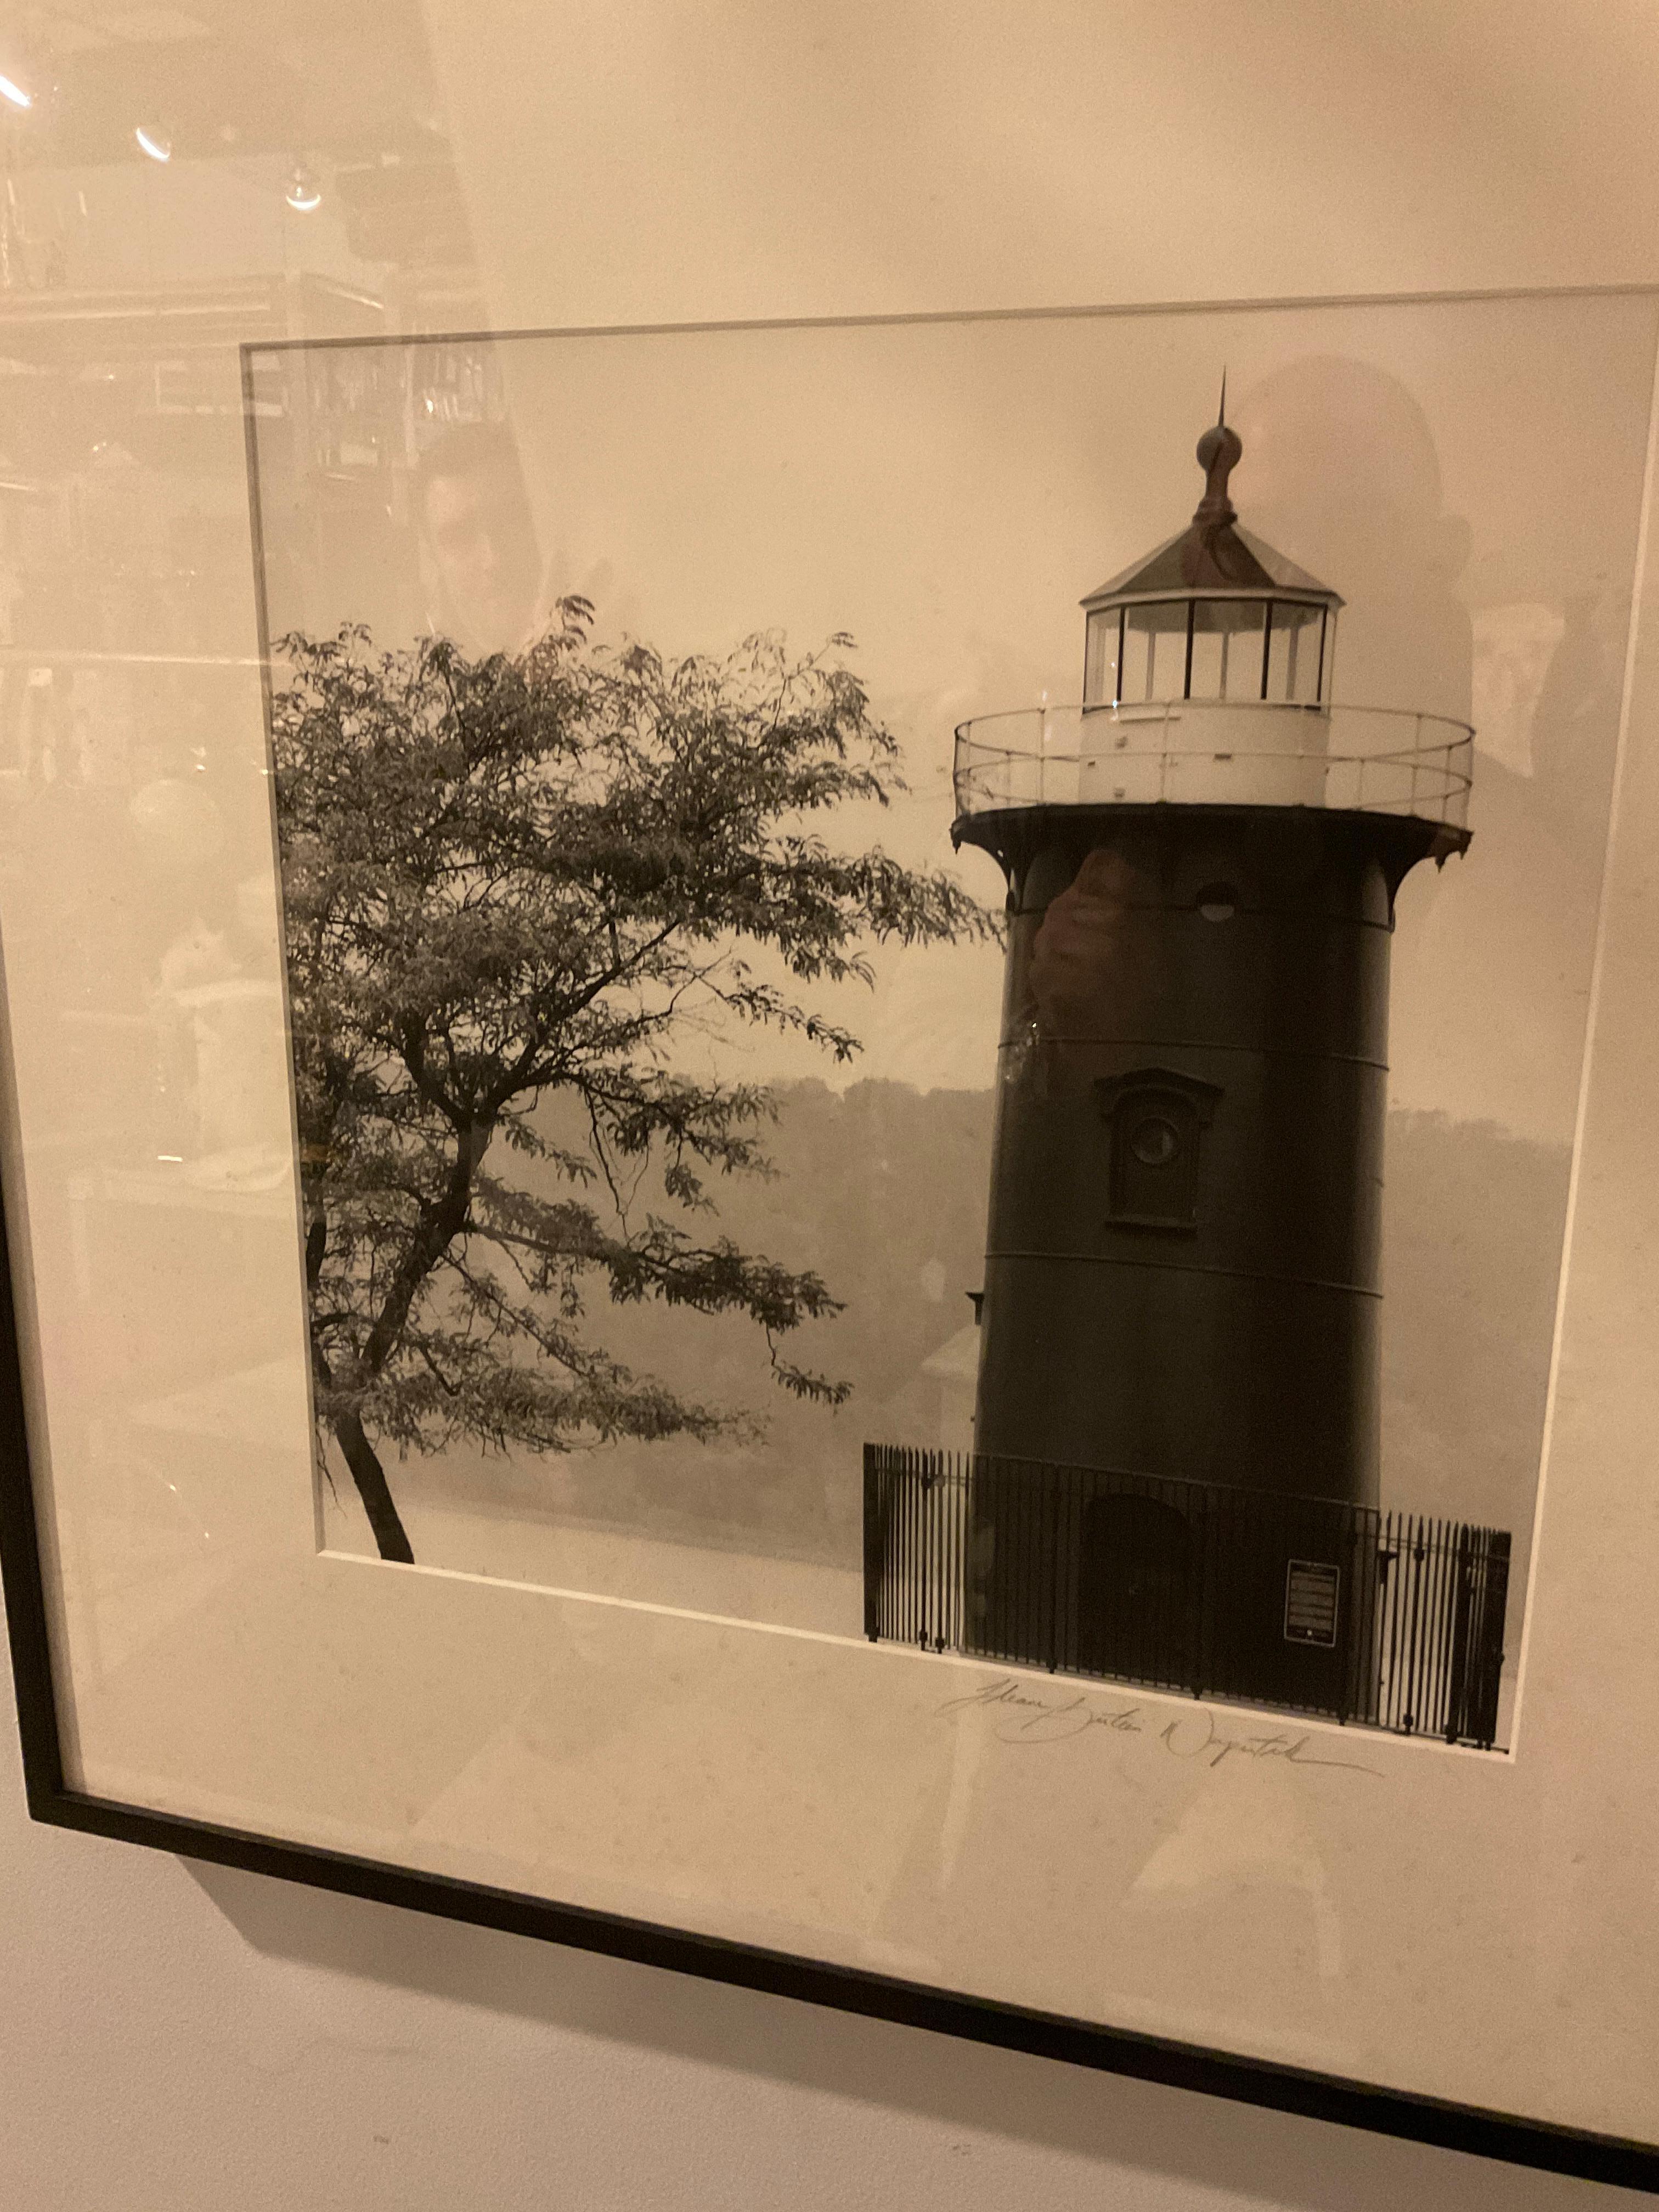 Contemporary Little Red Lighthouse Photograph By Ileane Bernstein Naprstek For Sale